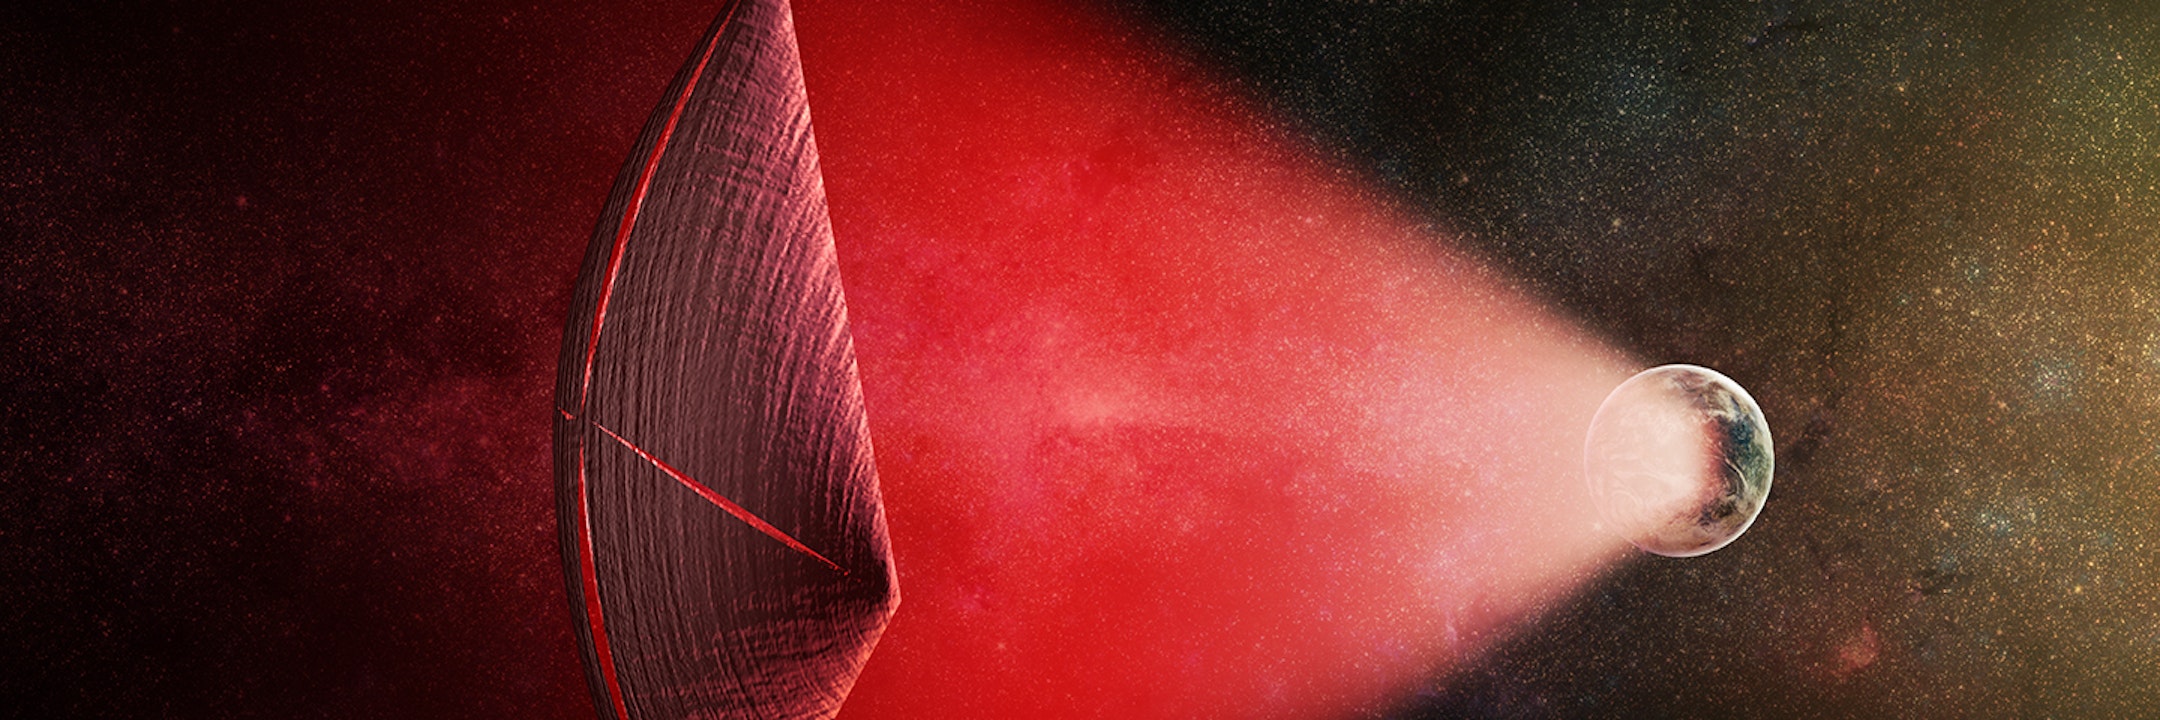 An artist's illustration of a light-sail powered by a radio beam (red) generated on the surface of a planet. The leakage from such beams as they sweep across the sky would appear as Fast Radio Bursts (FRBs), similar to the new population of sources that was discovered recently at cosmological distances.